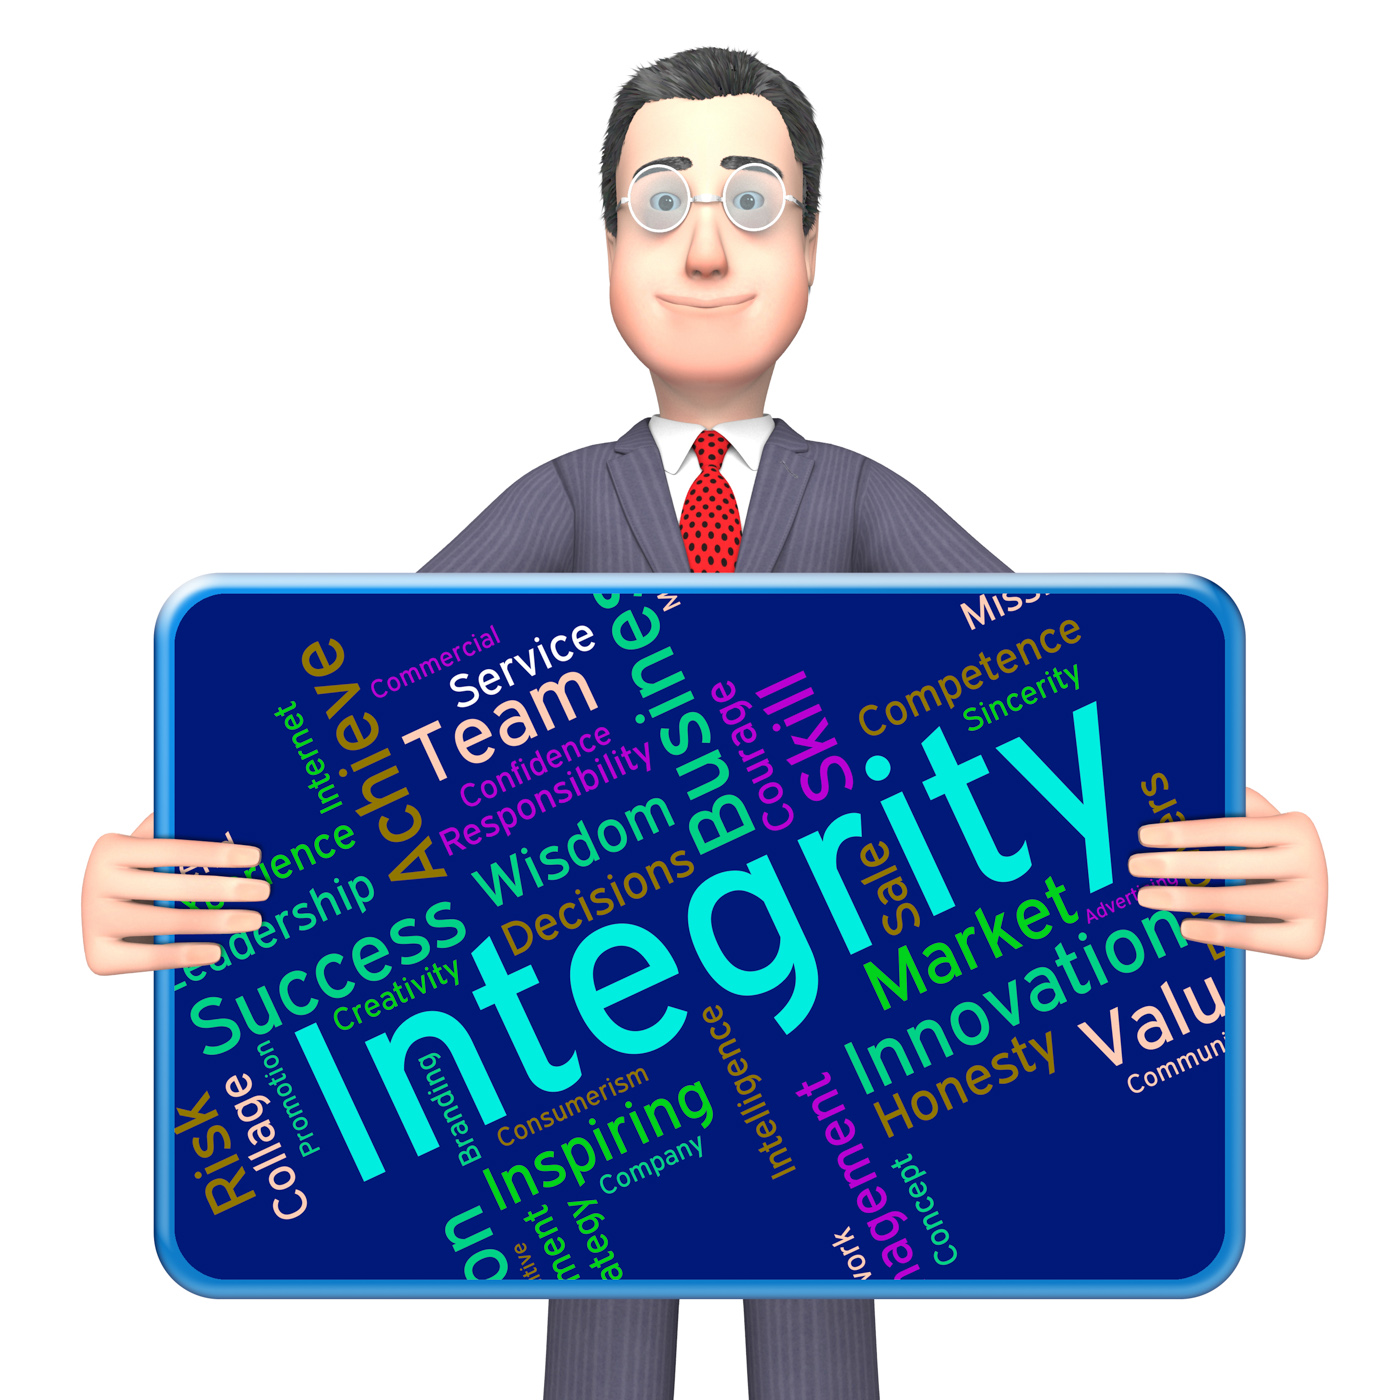 Integrity words means sincerity decency and righteousness photo